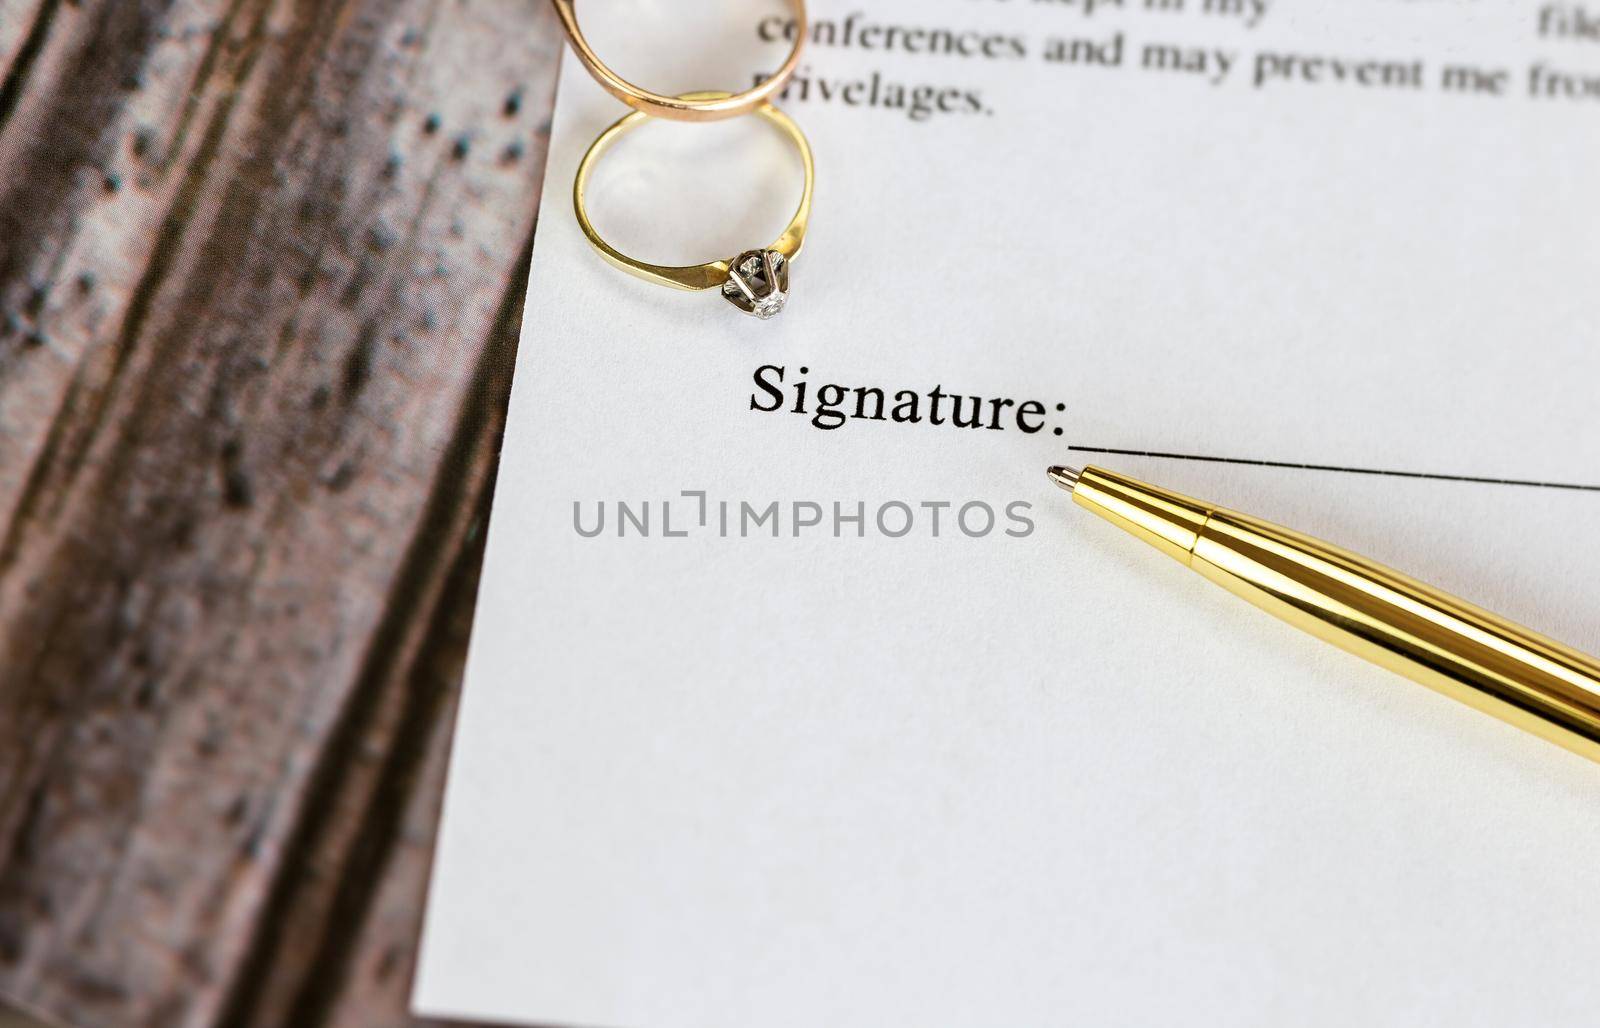 Marriage contract with two golden wedding rings and gold pen, prenuptial agreement, macro close up, sign with signanture,document,agreement concept by Annebel146